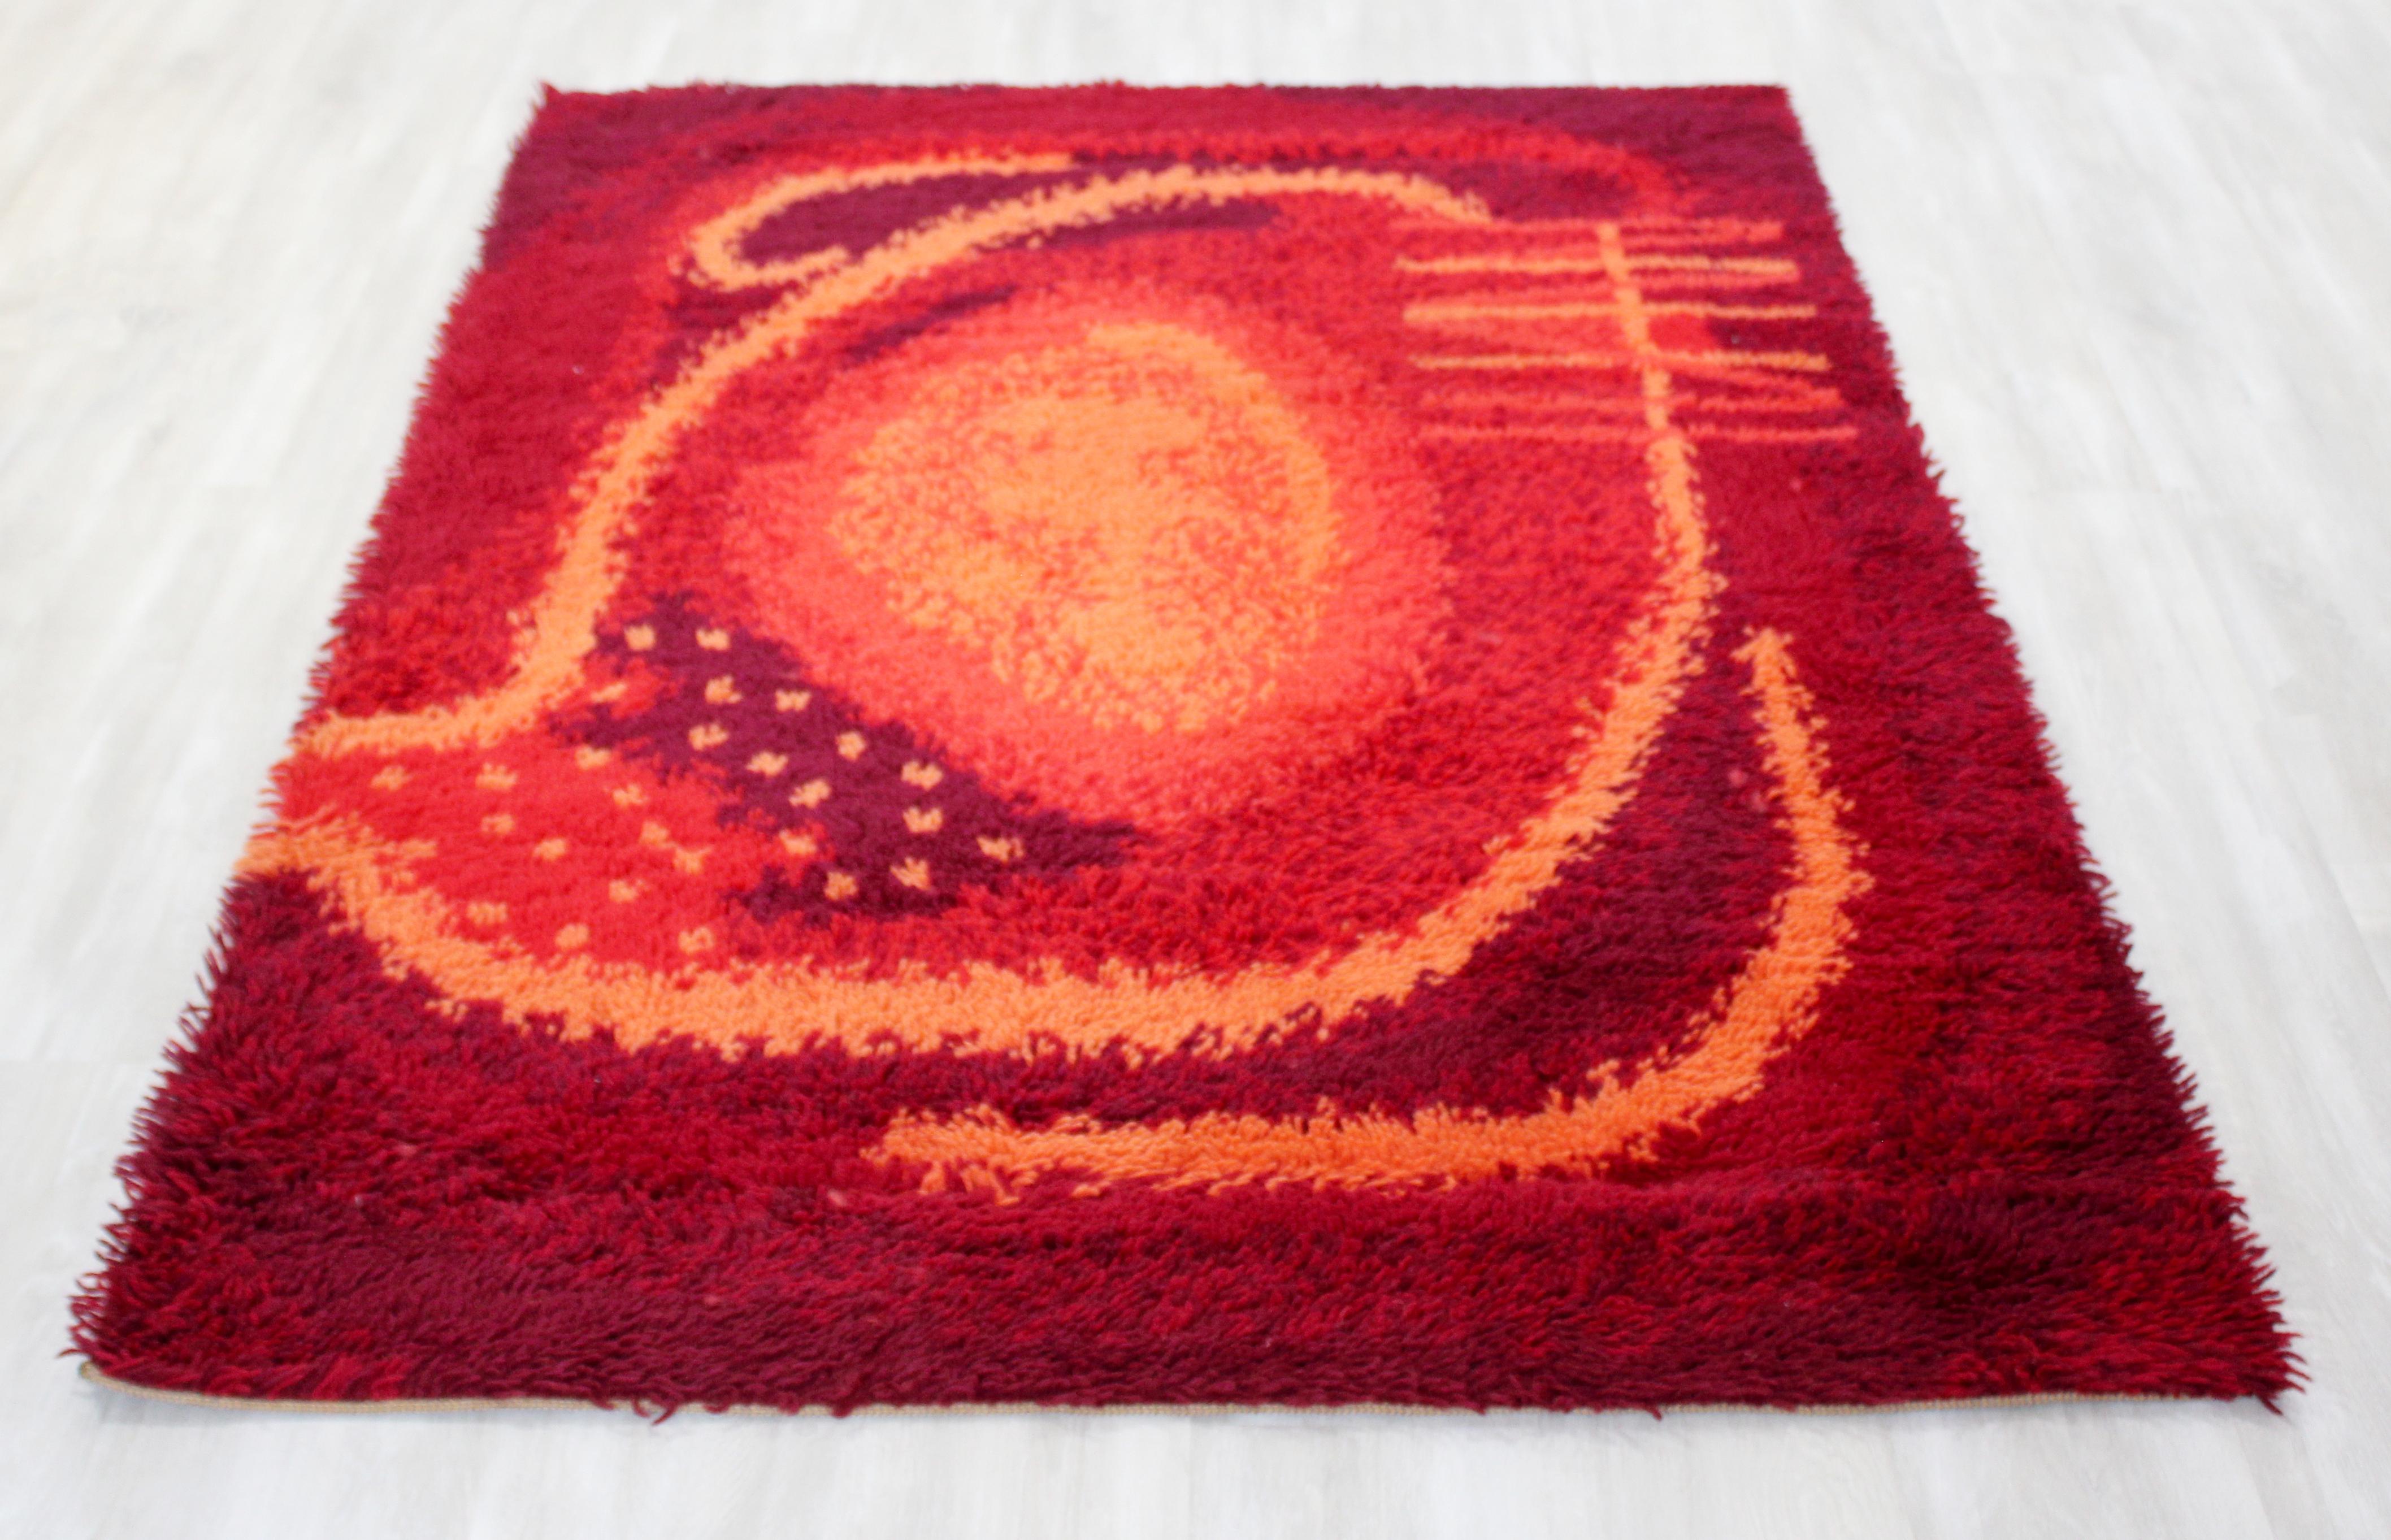 For your consideration is a vibrant, Danish, rectangular Rya area rug or carpet, with a red and orange pattern, circa the 1960s. In very good condition. The dimensions are 72